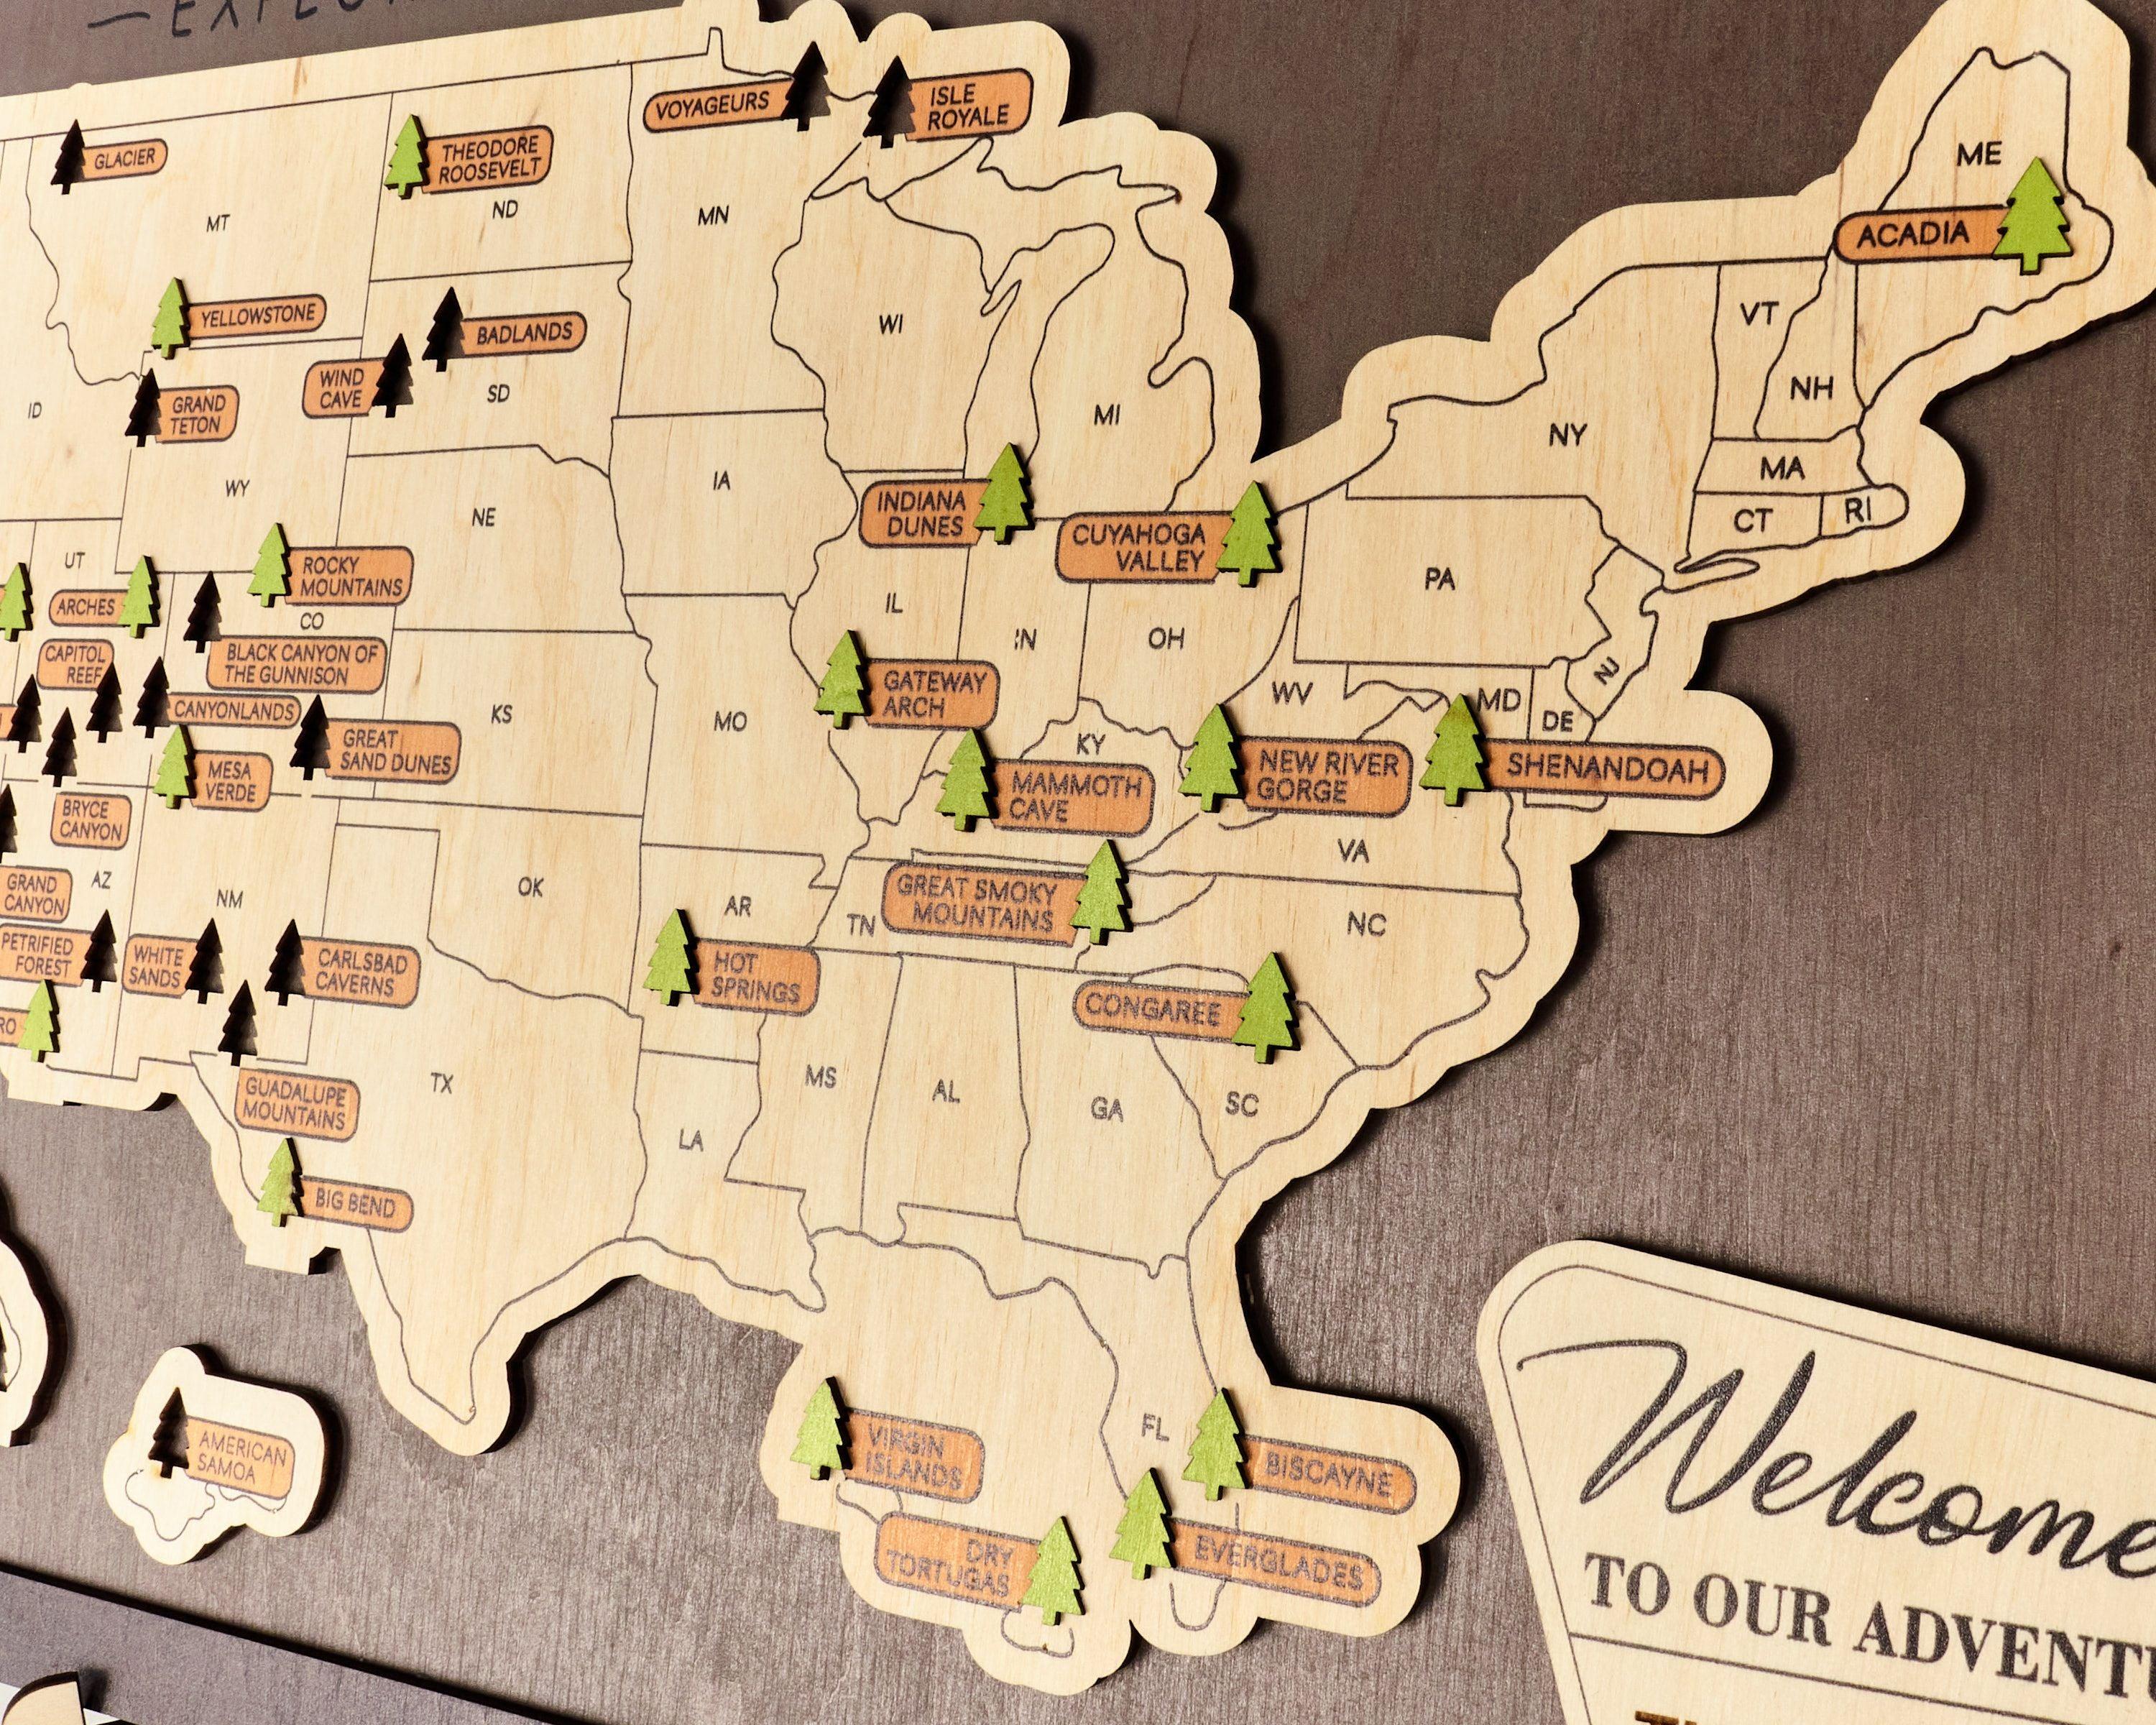 US Wooden National Parks Travel Map With Trees To Record Park Visits (Coffee) - Lemap